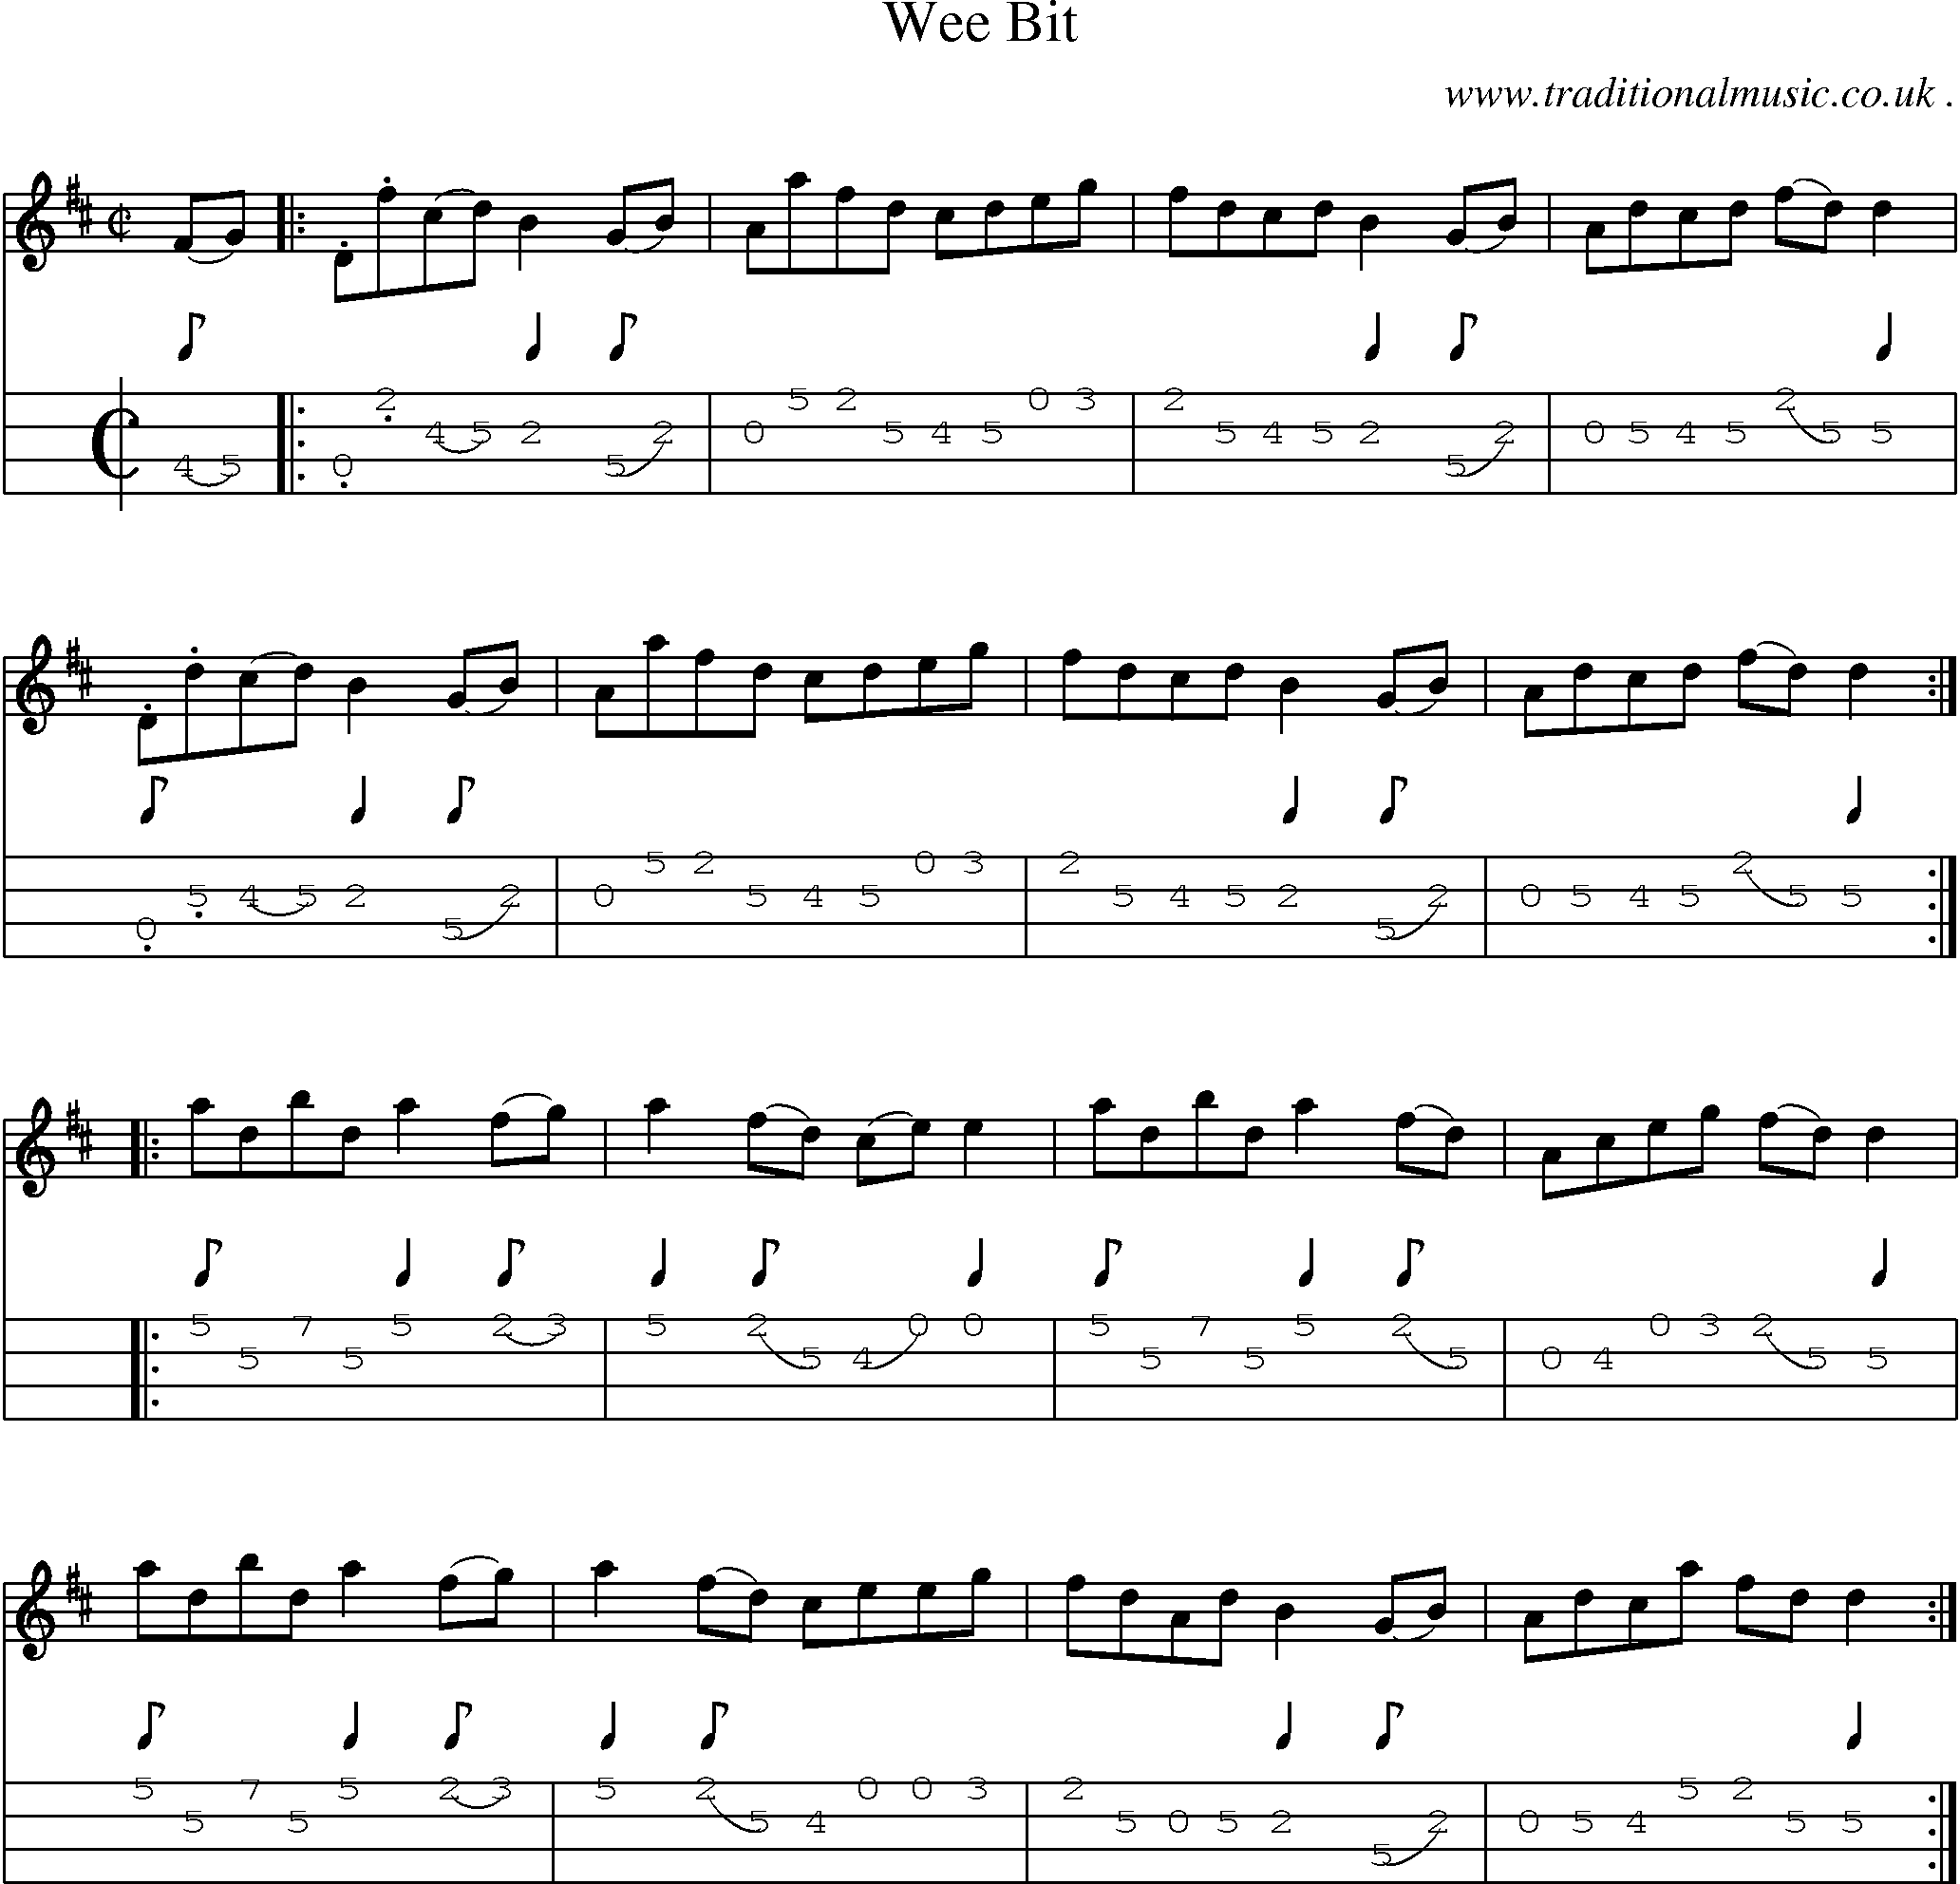 Sheet-Music and Mandolin Tabs for Wee Bit